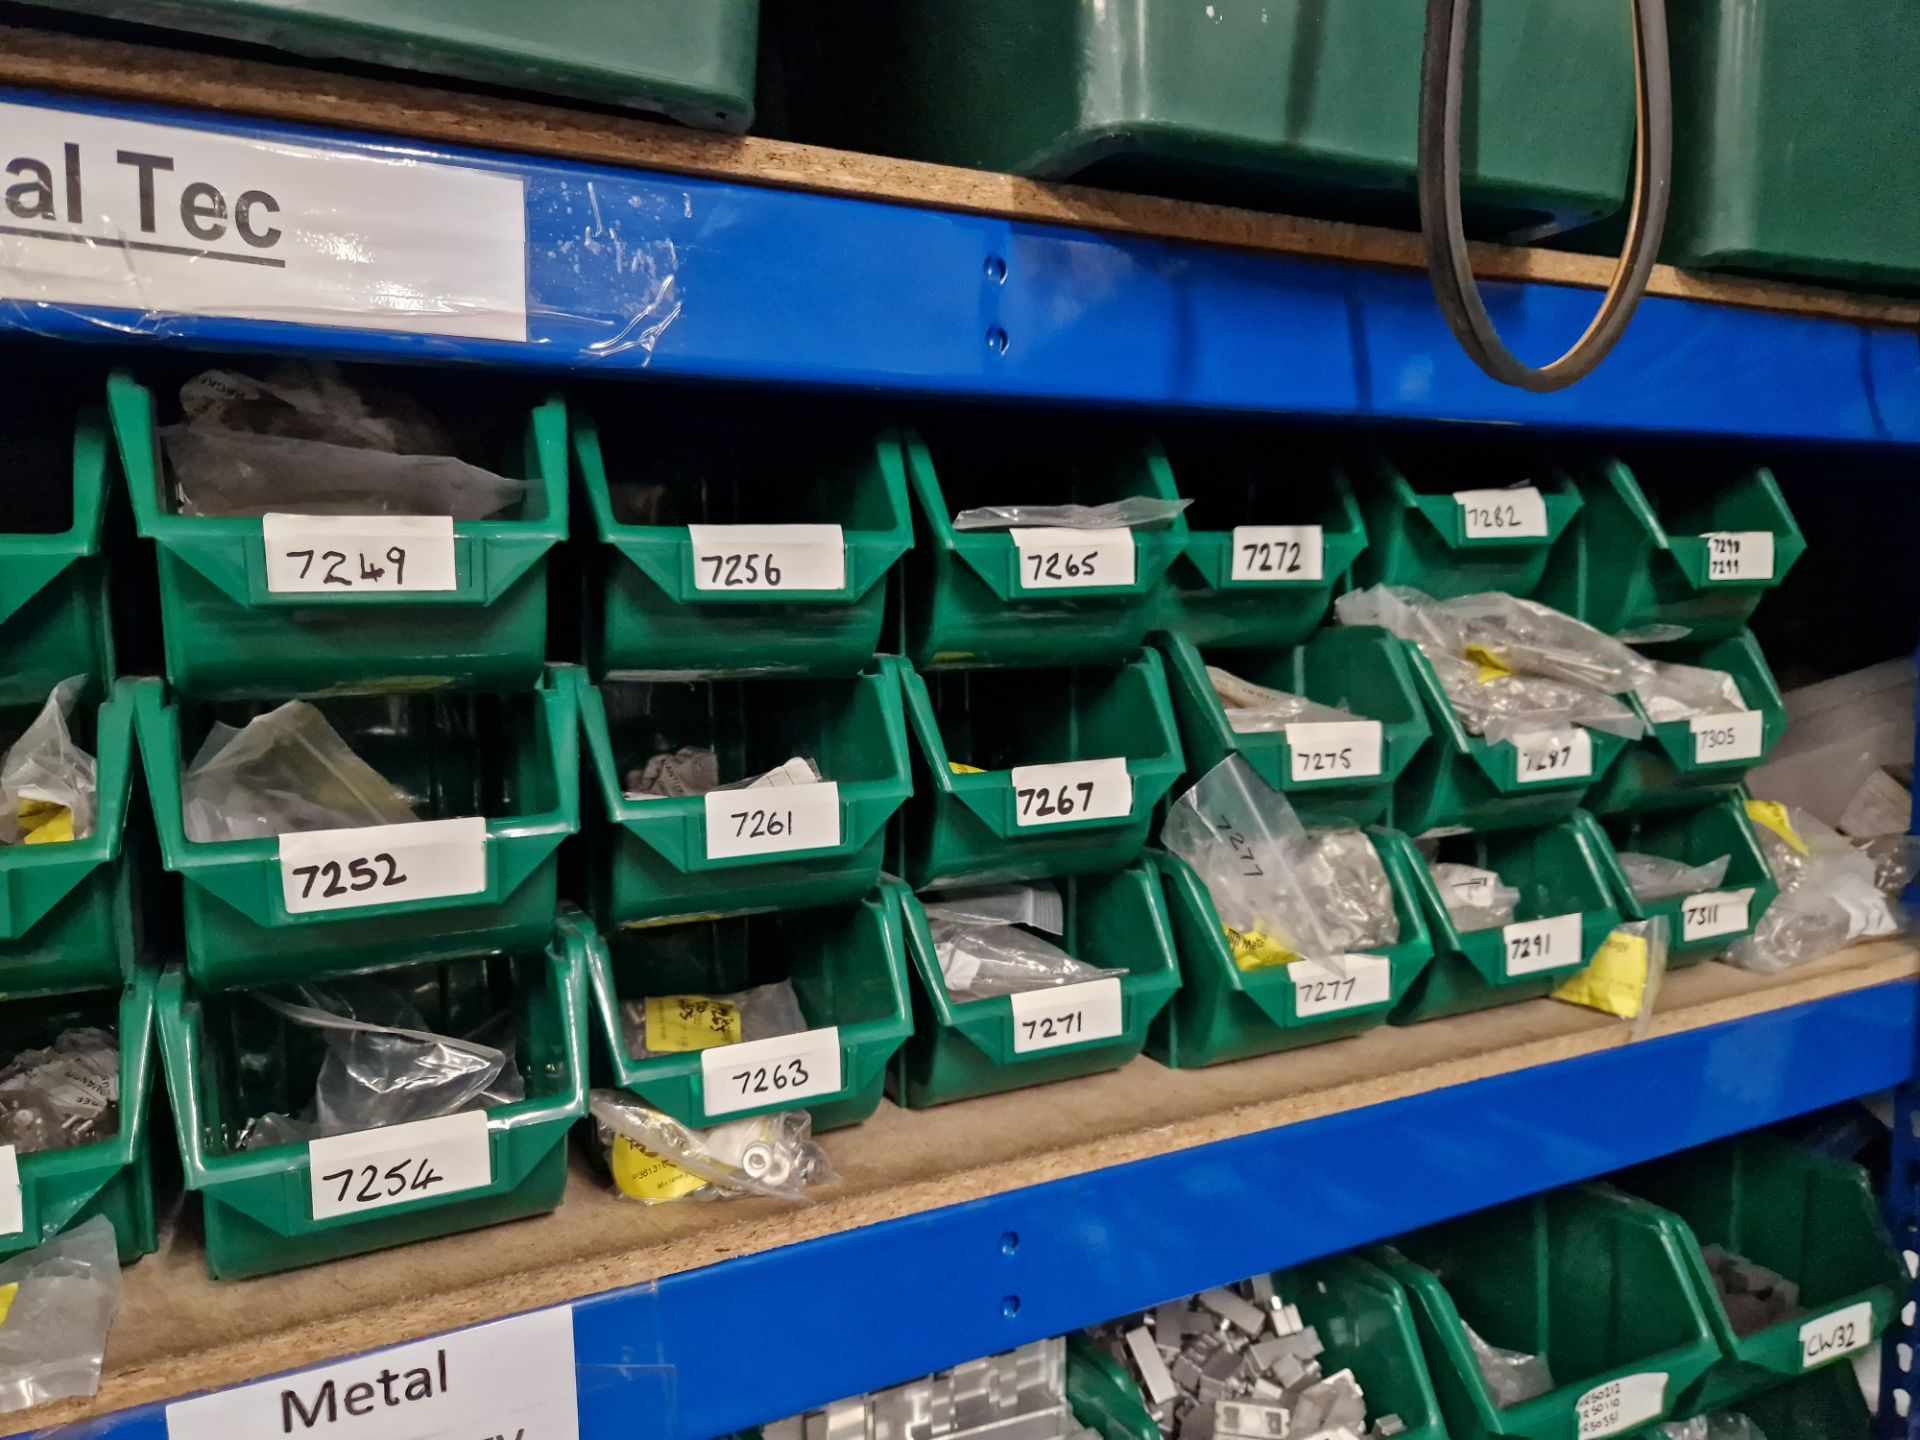 Contents to One Bay of Shelving, including Rubber Gaskets, Aluminium Profile, End Caps, Screws, - Bild 5 aus 6